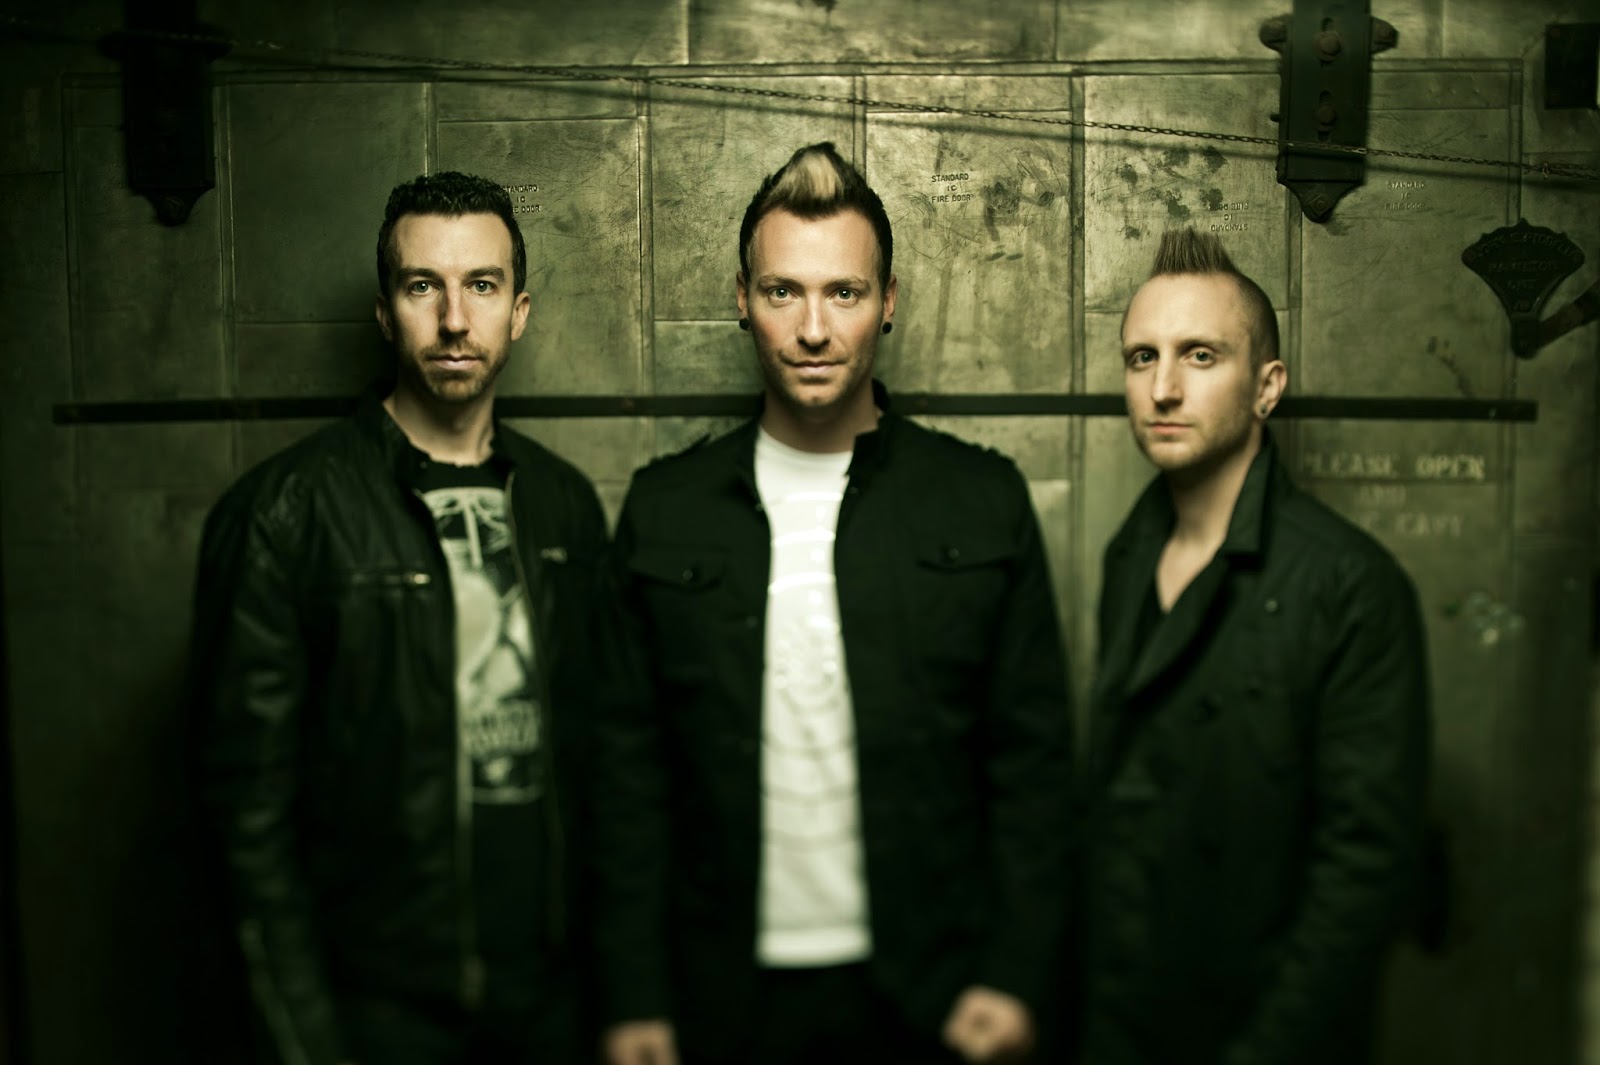 Thousand Foot Krutch - Oxygen Inhale 2014 Biography and History